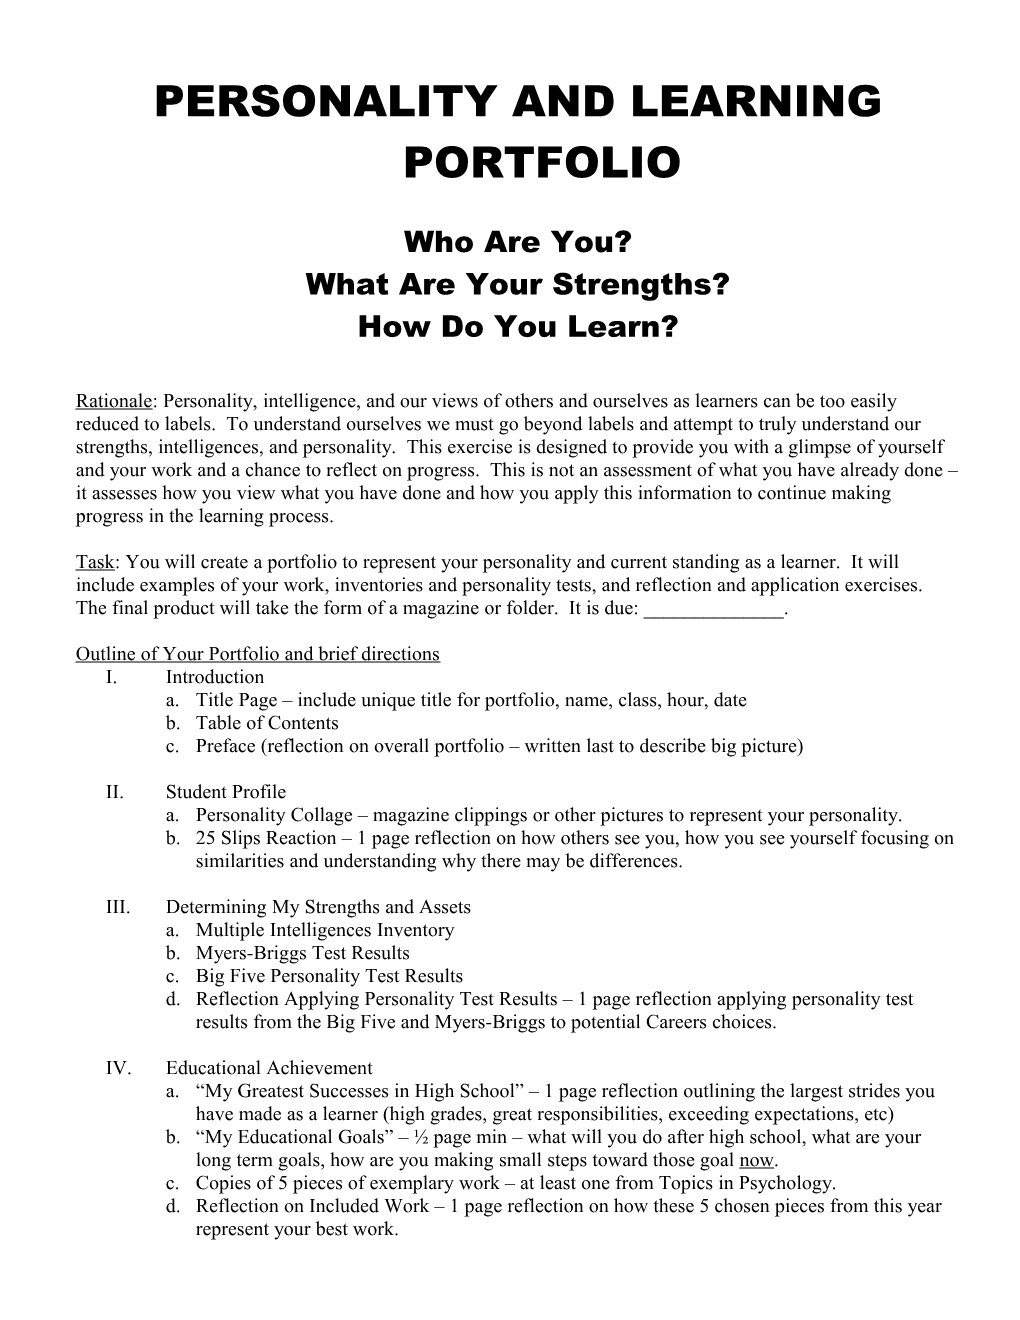 Personality and Learning Portfolio